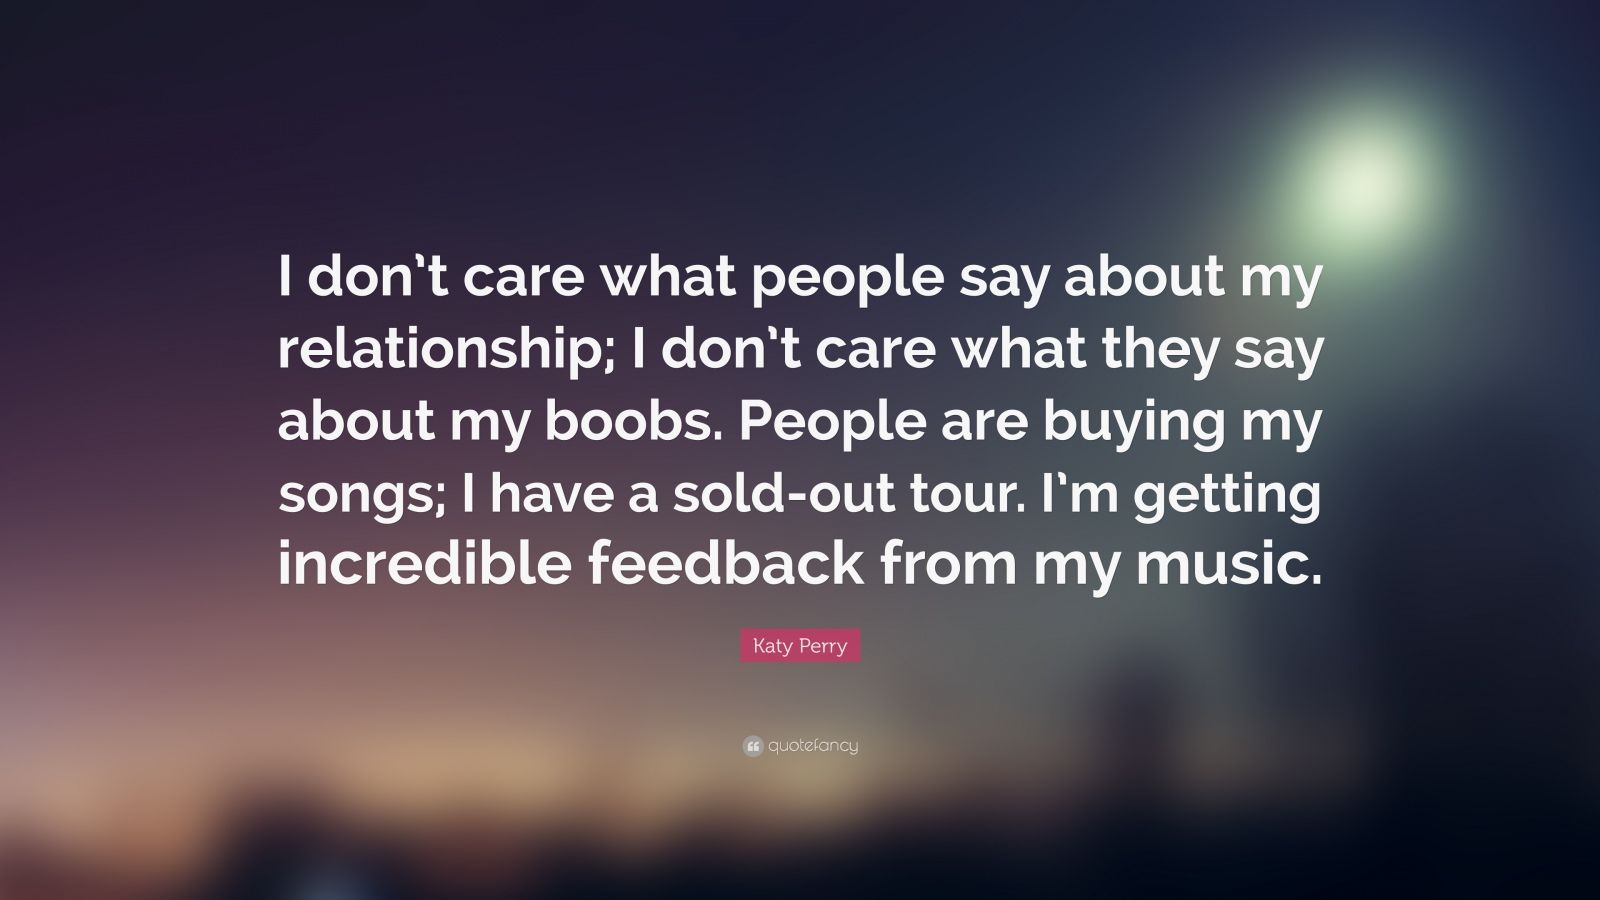 Katy Perry Quote: “I don’t care what people say about my relationship; I don’t ...1600 x 900